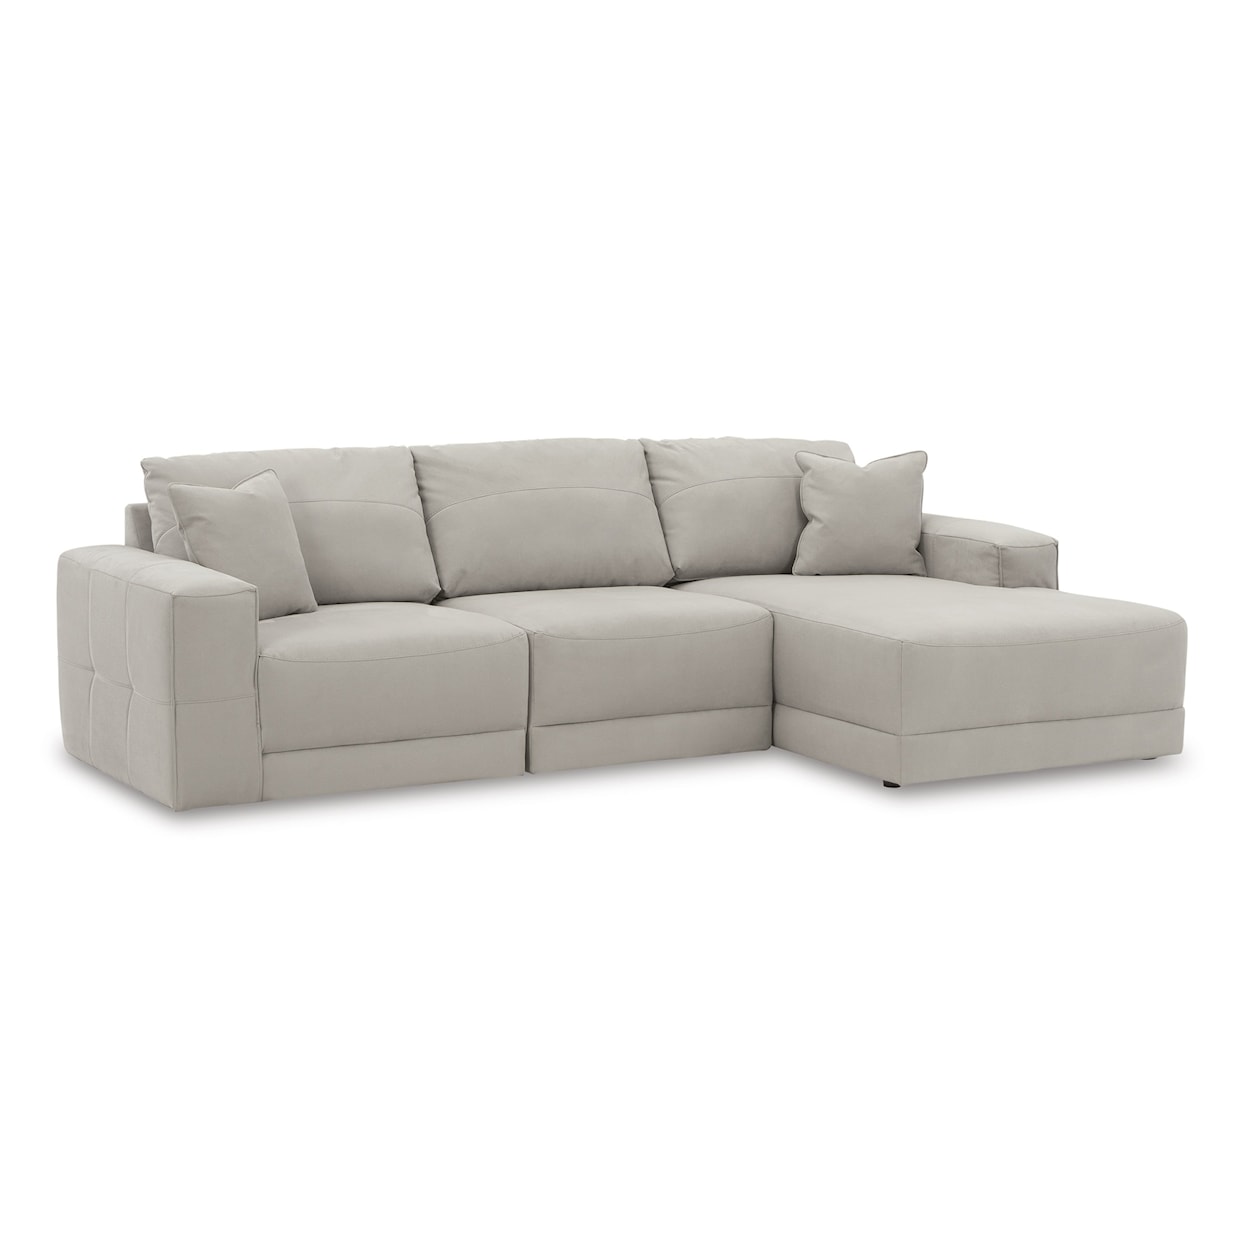 Michael Alan Select Next-Gen Gaucho 3-Piece Sectional Sofa with Chaise